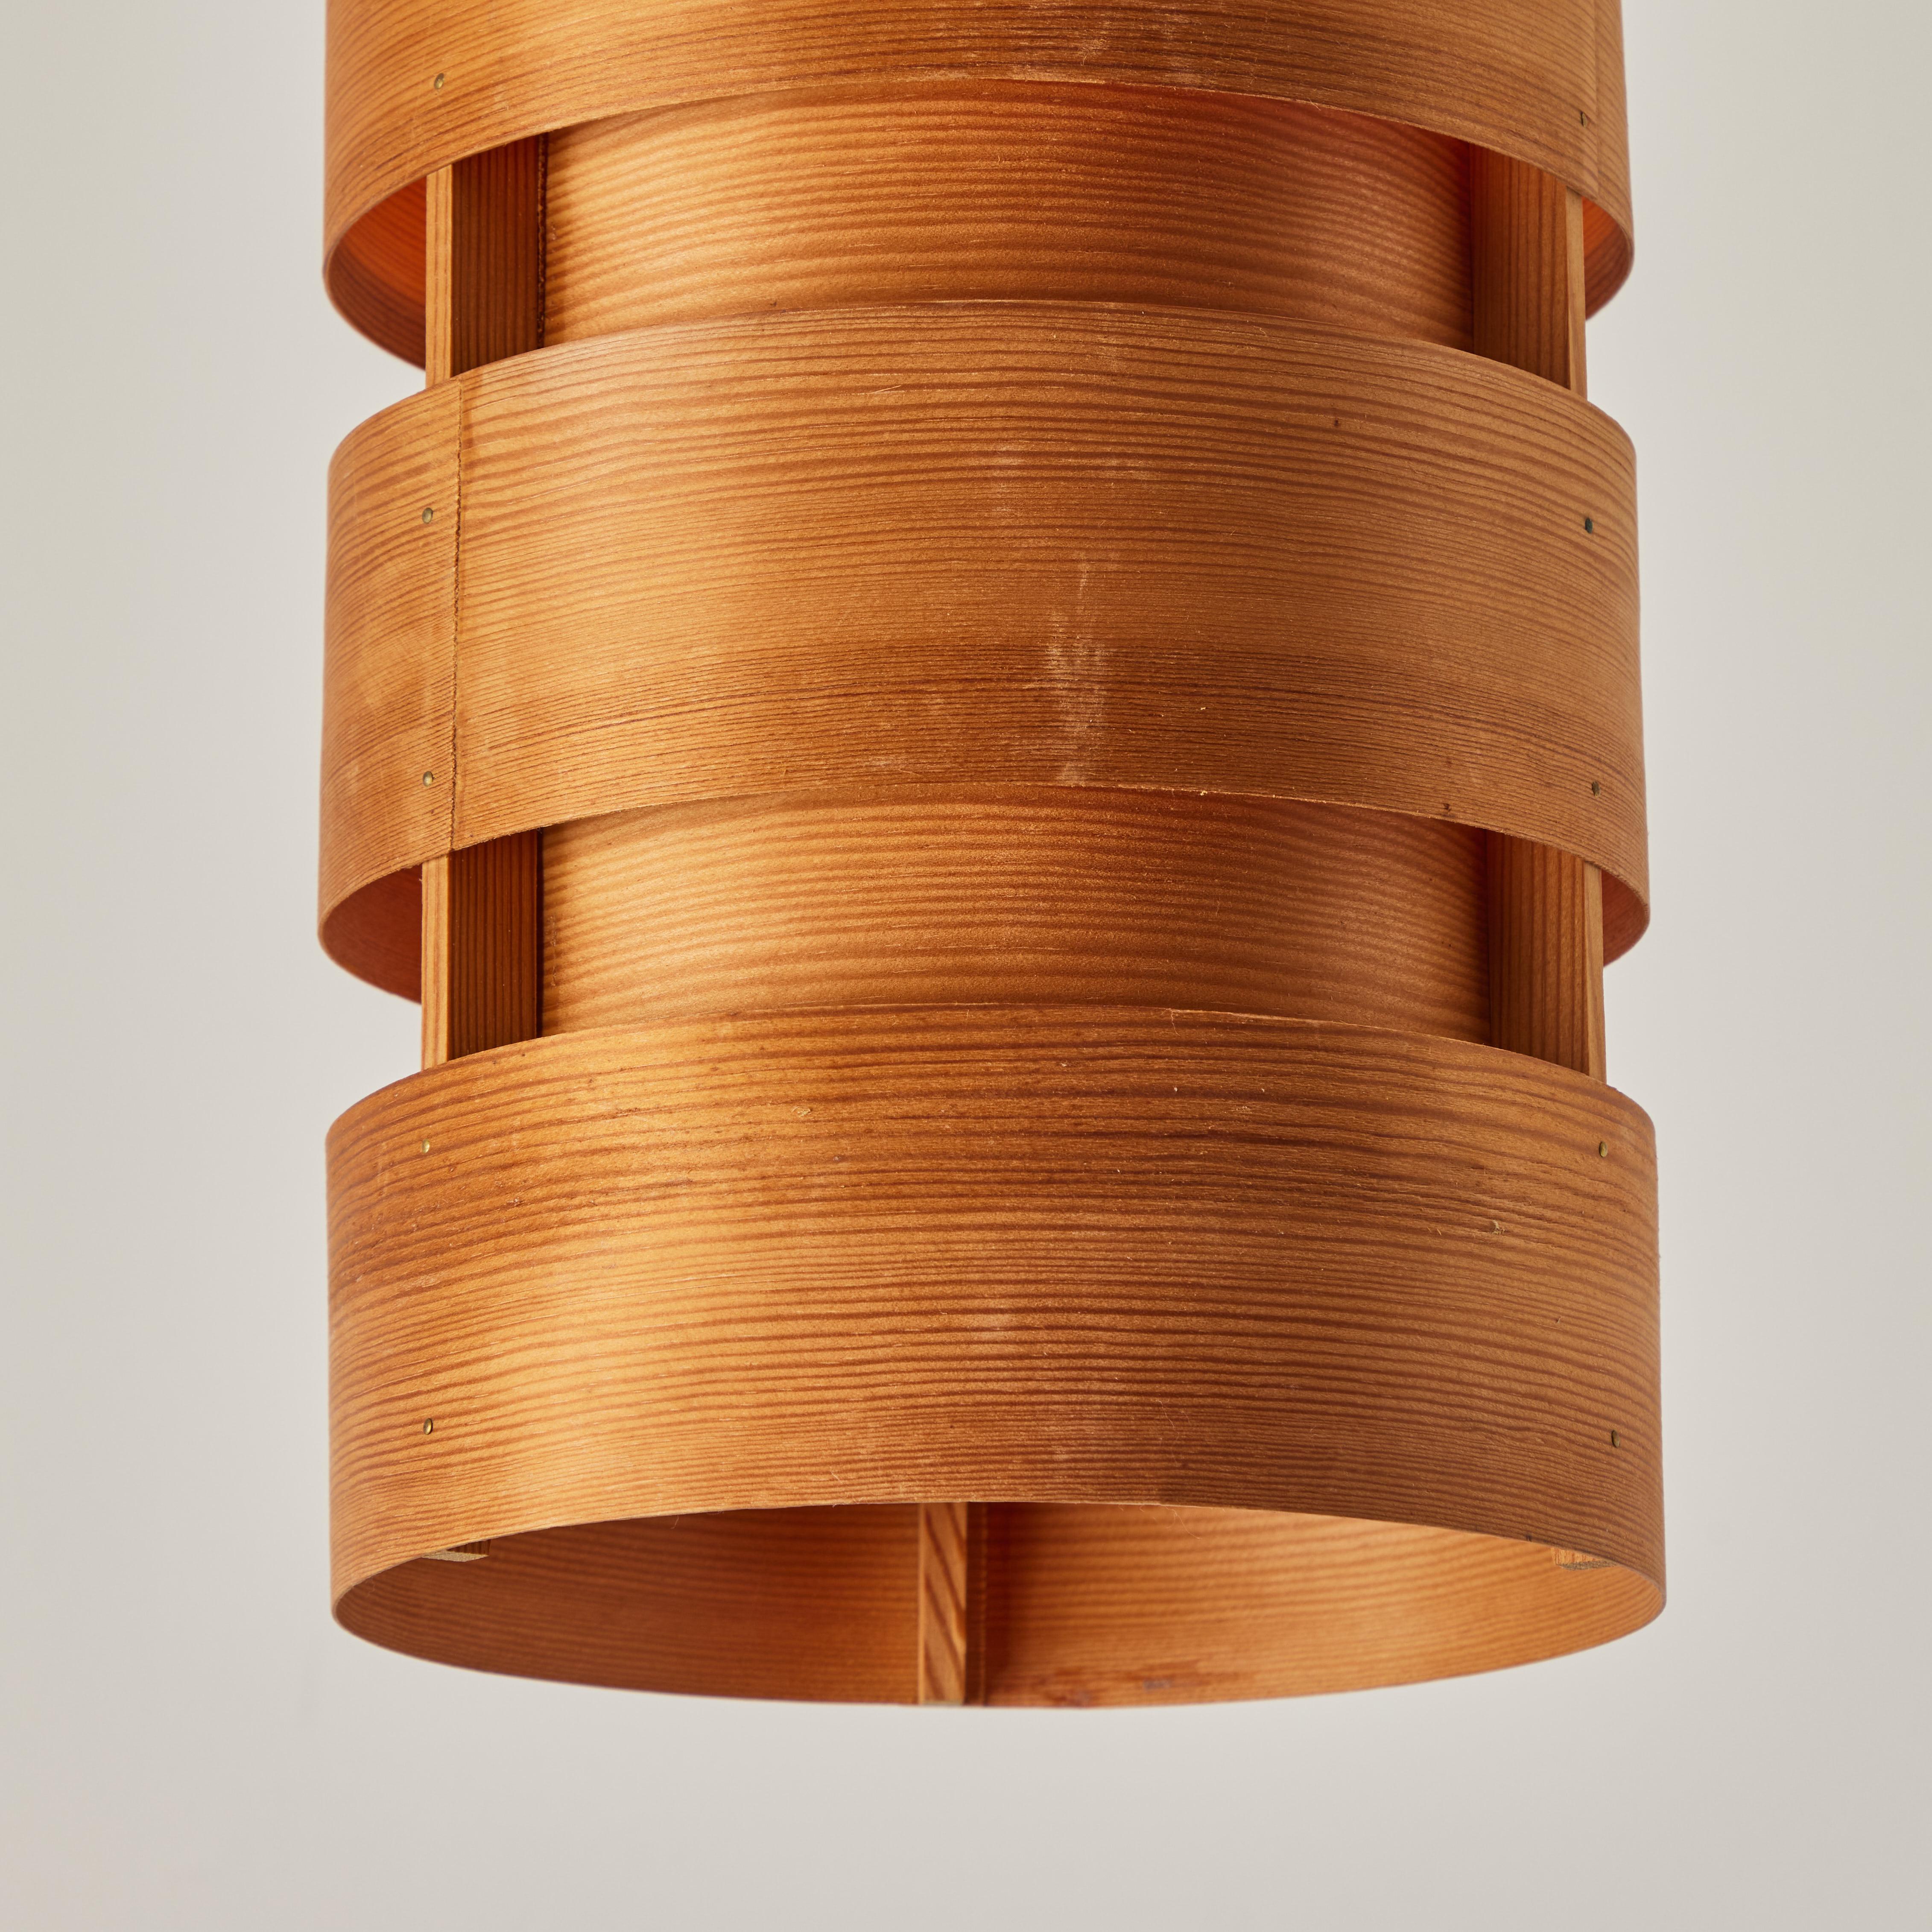 Large 1960s Hans-Agne Jakobsson Cylindrical Bentwood Pendant for AB Ellysett In Good Condition For Sale In Glendale, CA